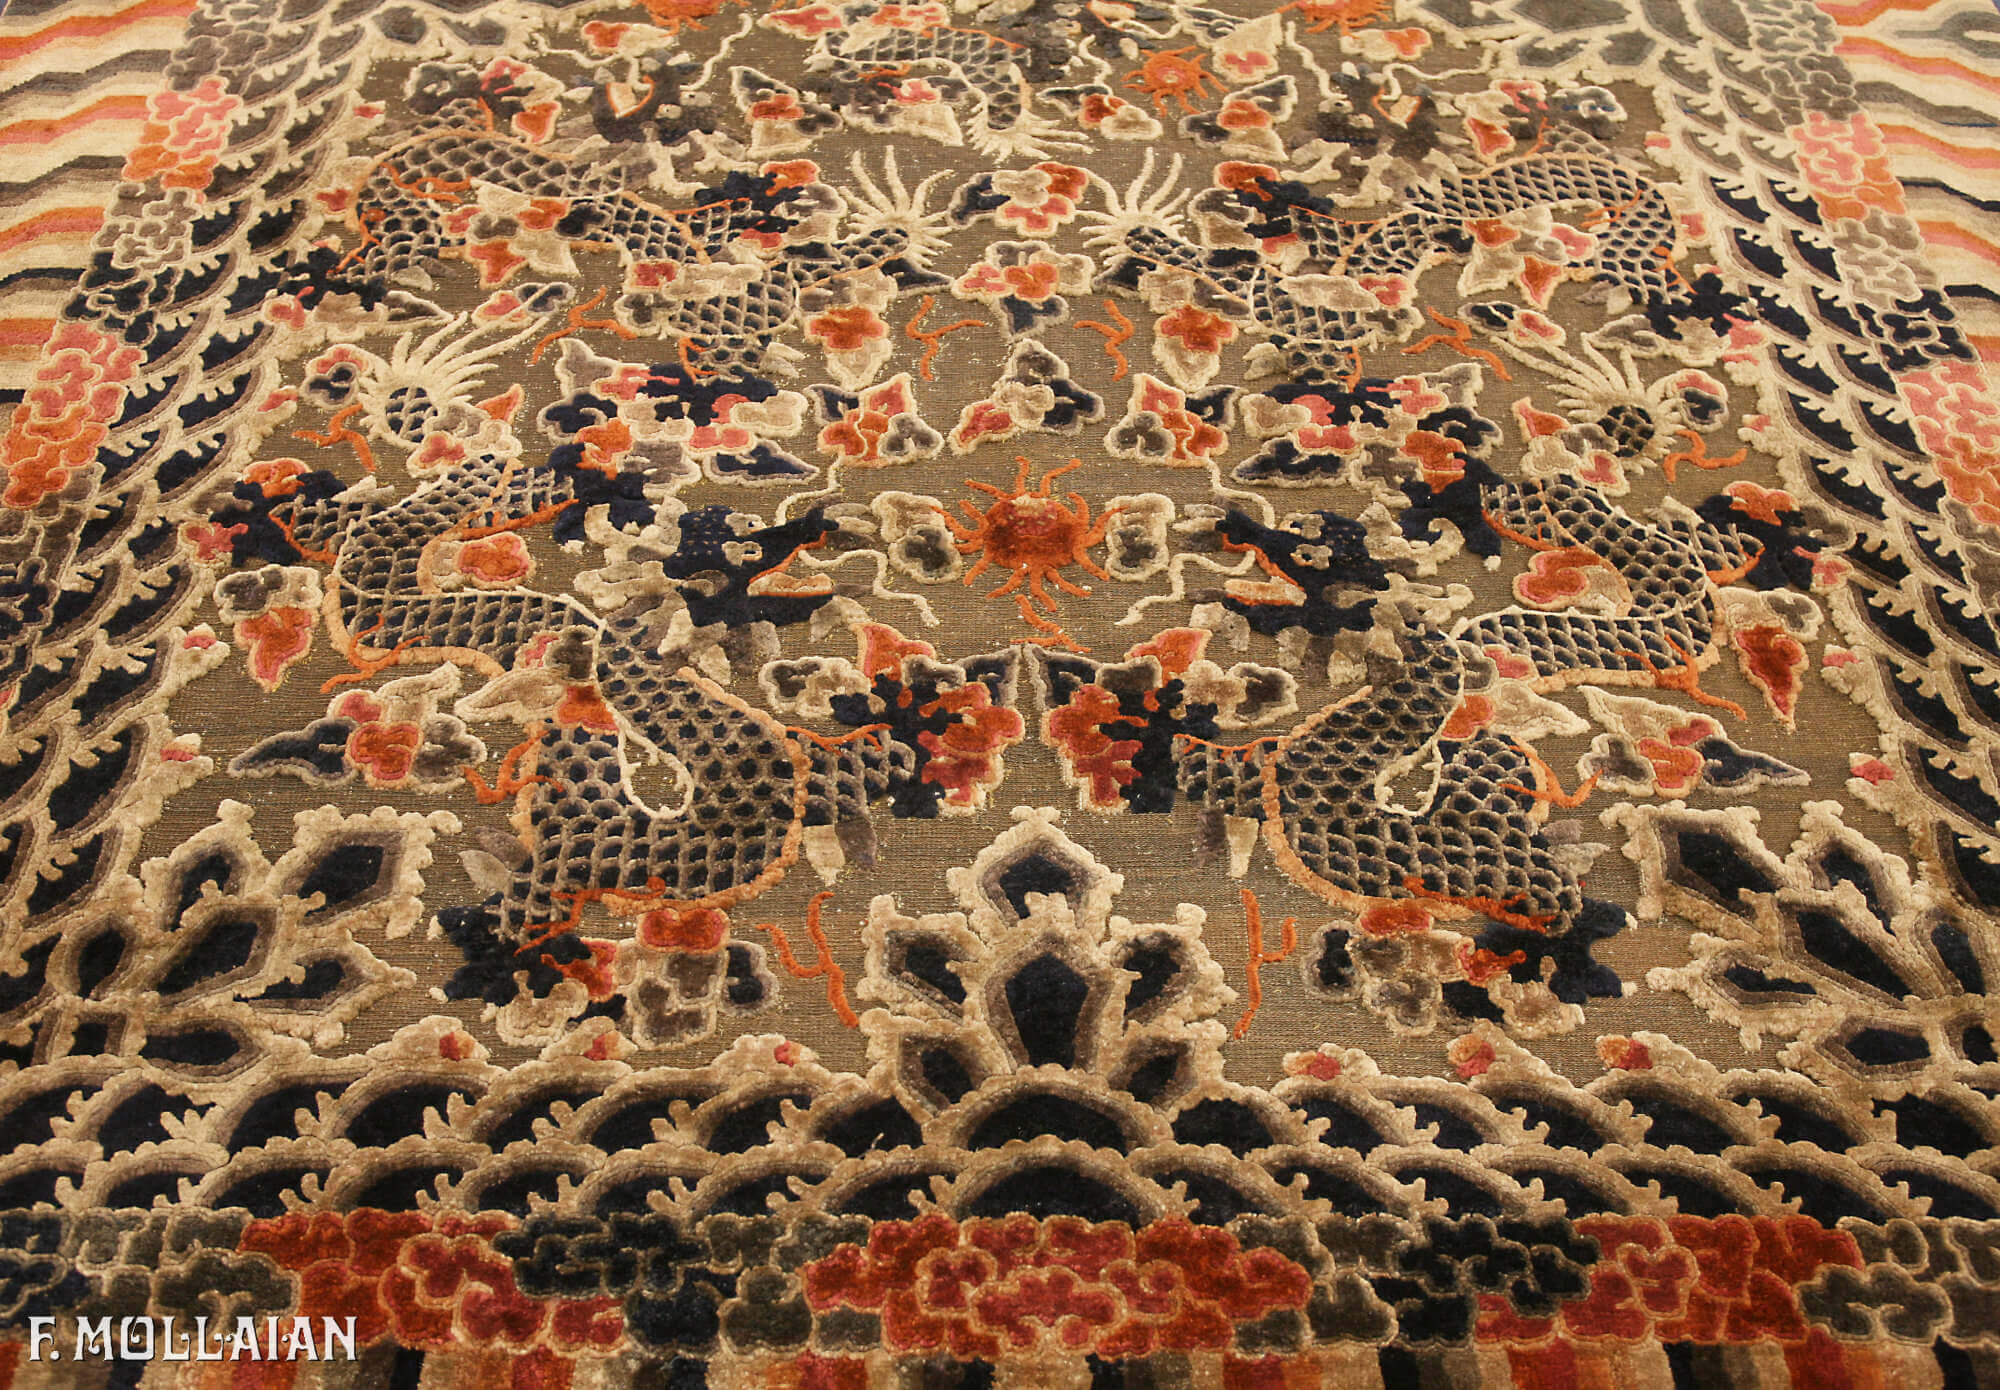 Antique Silk & Metal Imperial Palace Chinese Carpet n°:71420945